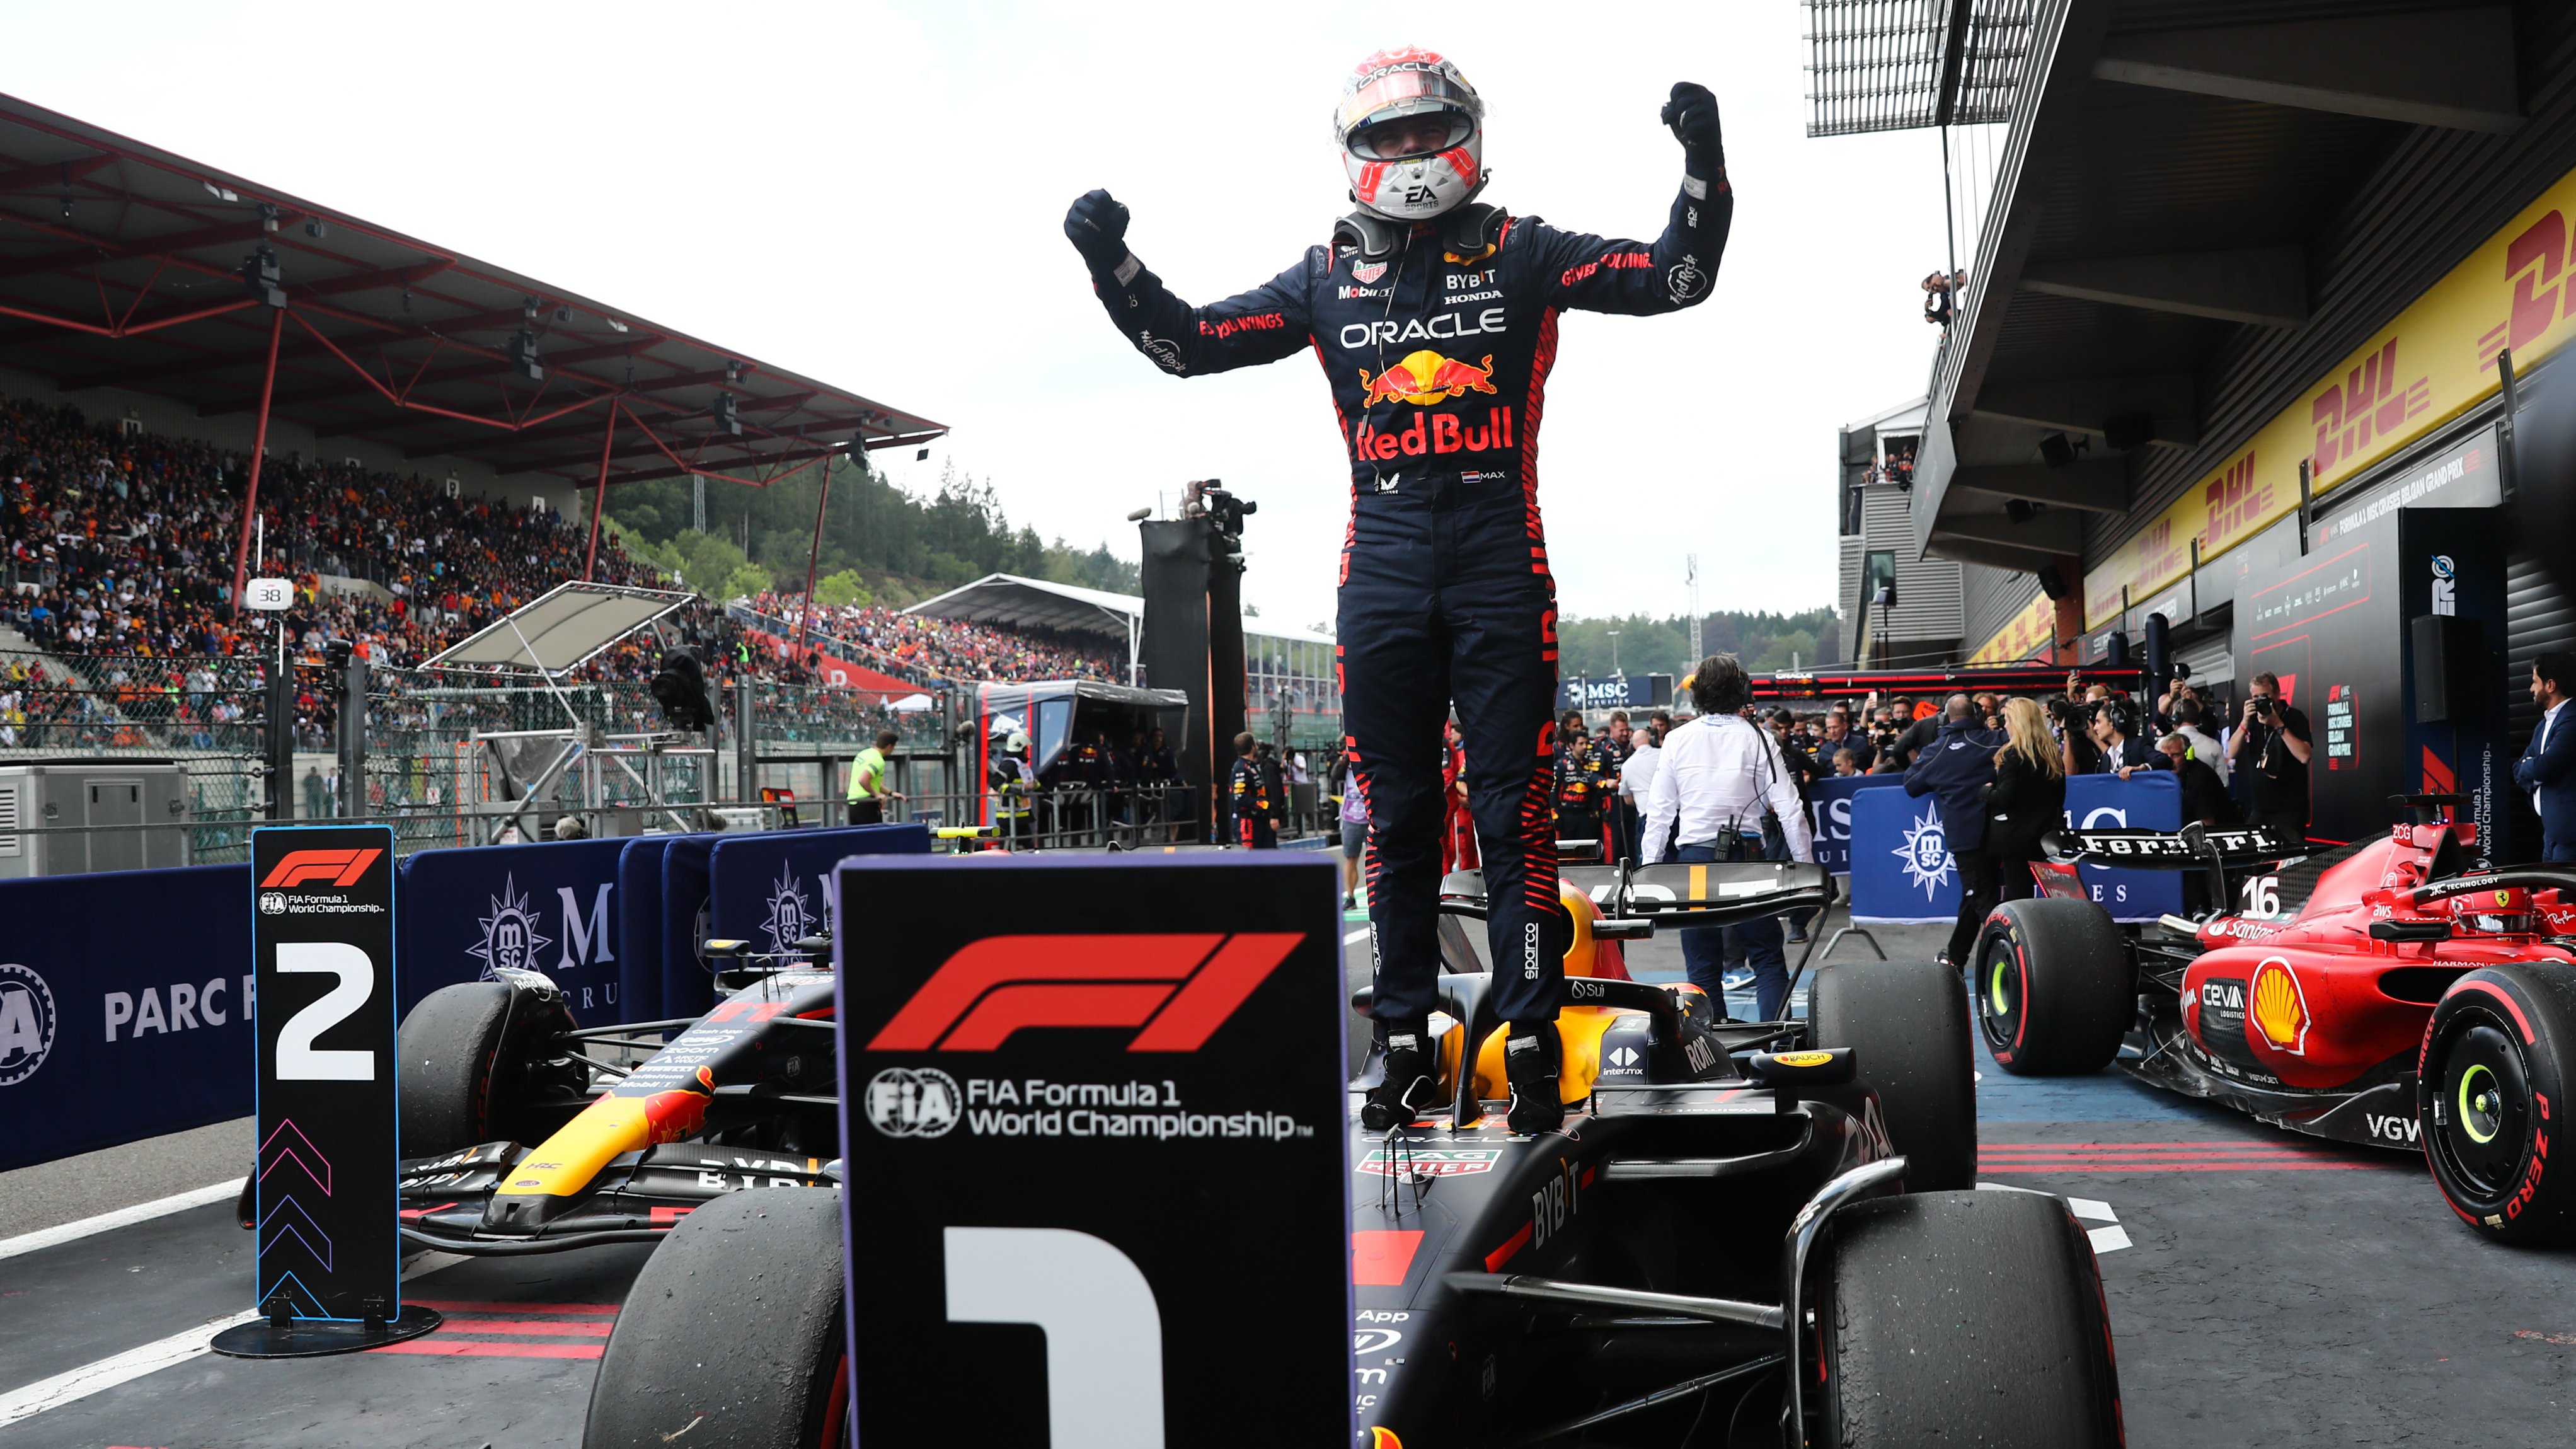 Max Verstappen wins 10 races in a row, breaking Formula 1 record